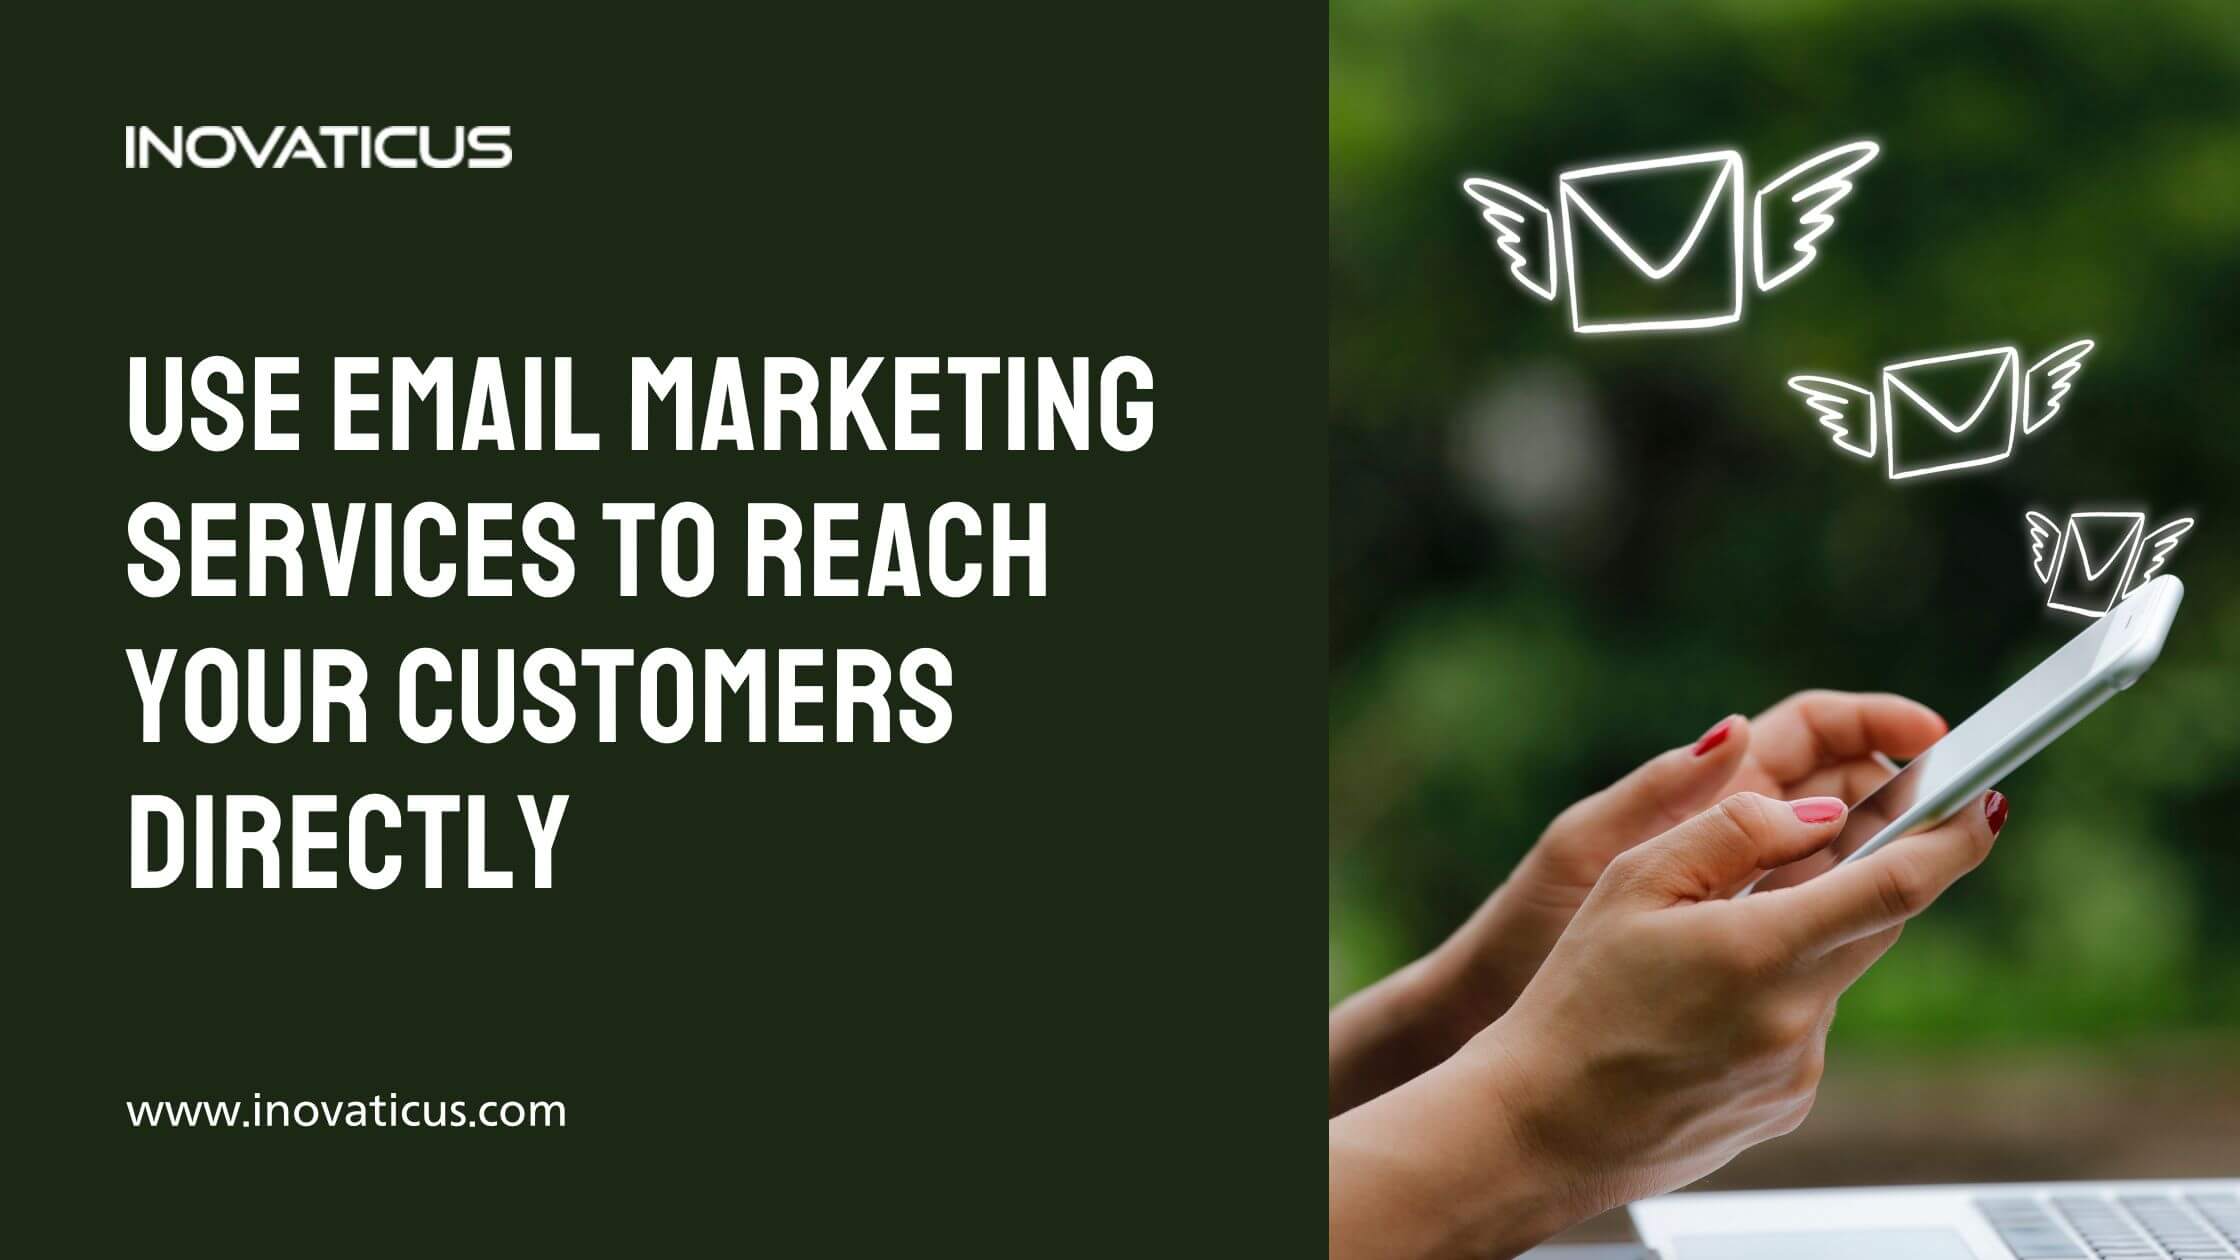 Use Email Marketing Services to Reach Your Customers Directly